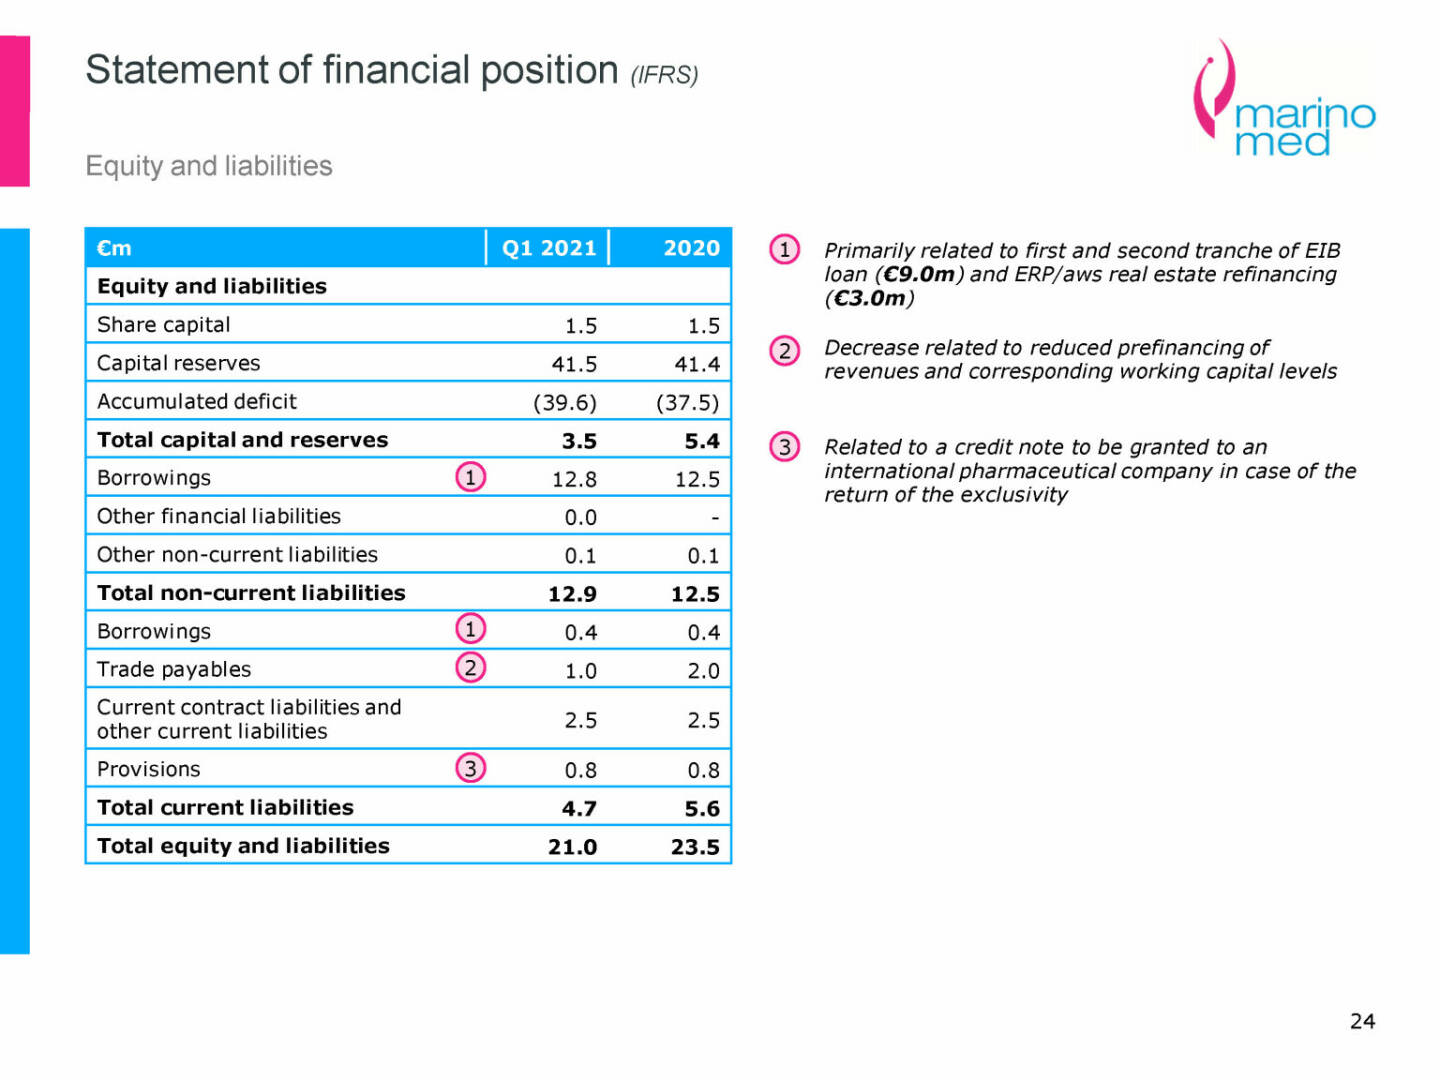 Marinomed - Statement of financial position (IFRS)